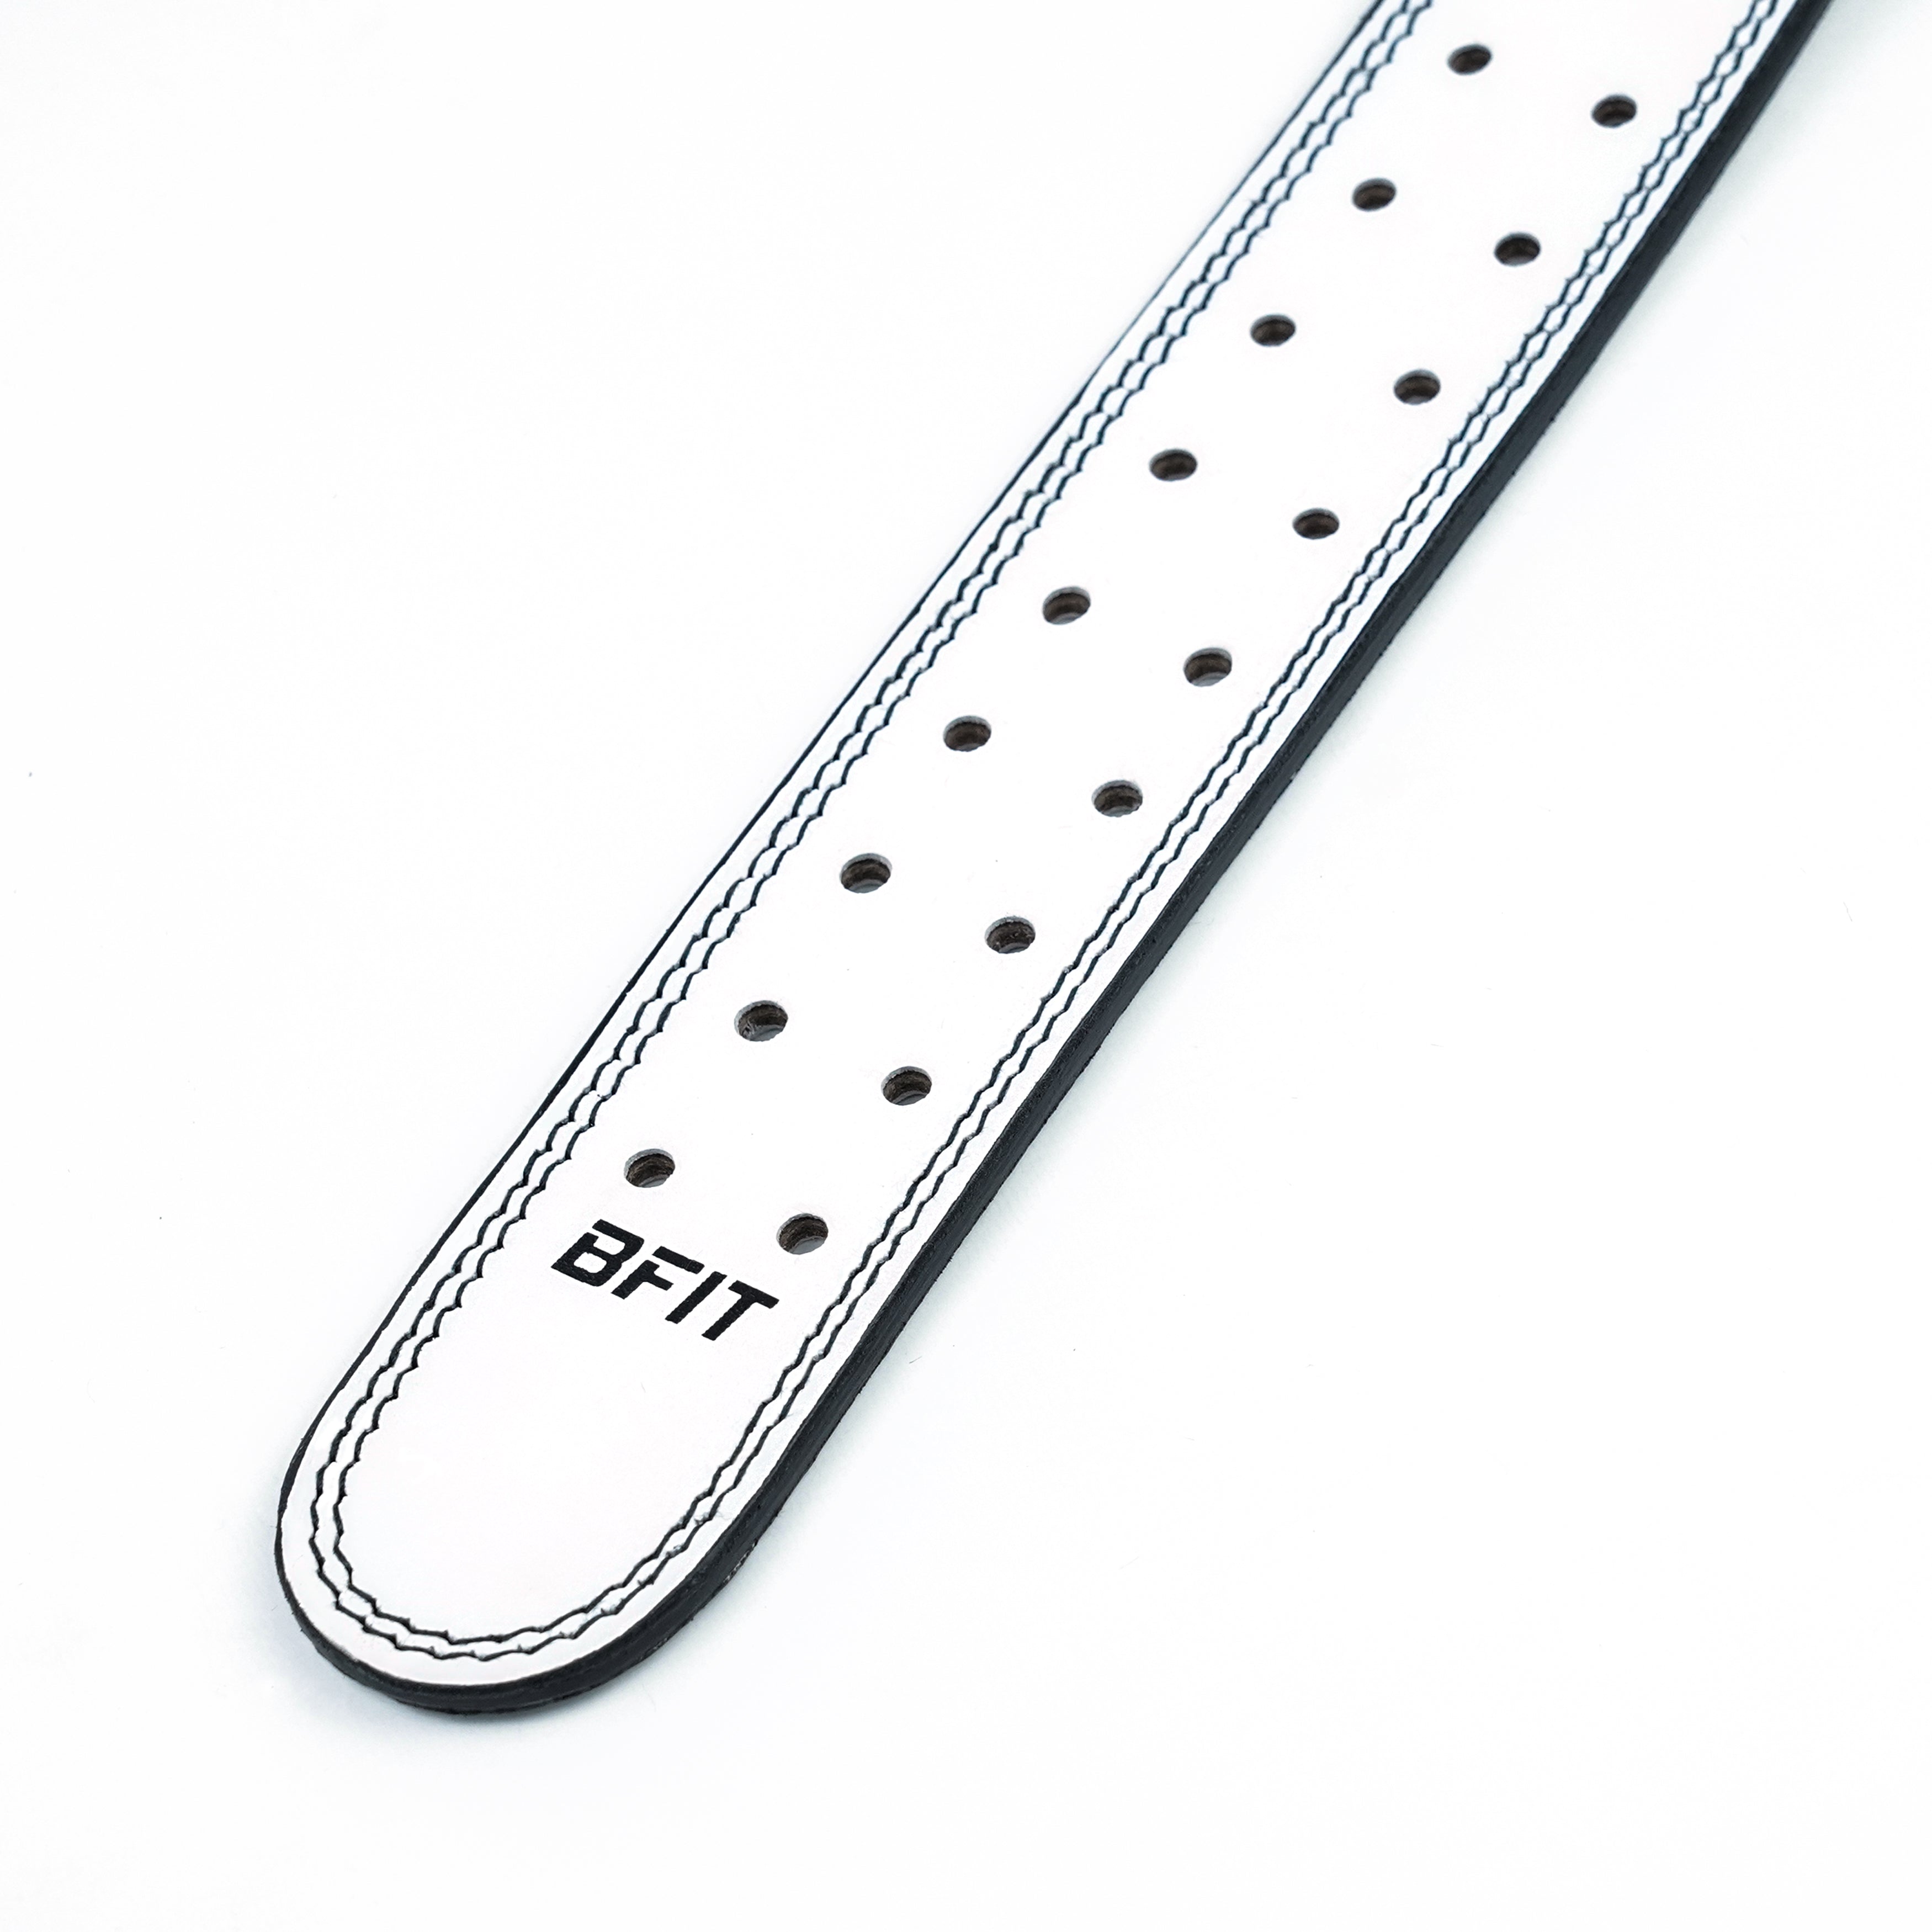 Performance Weightlifting Leather Belt - White